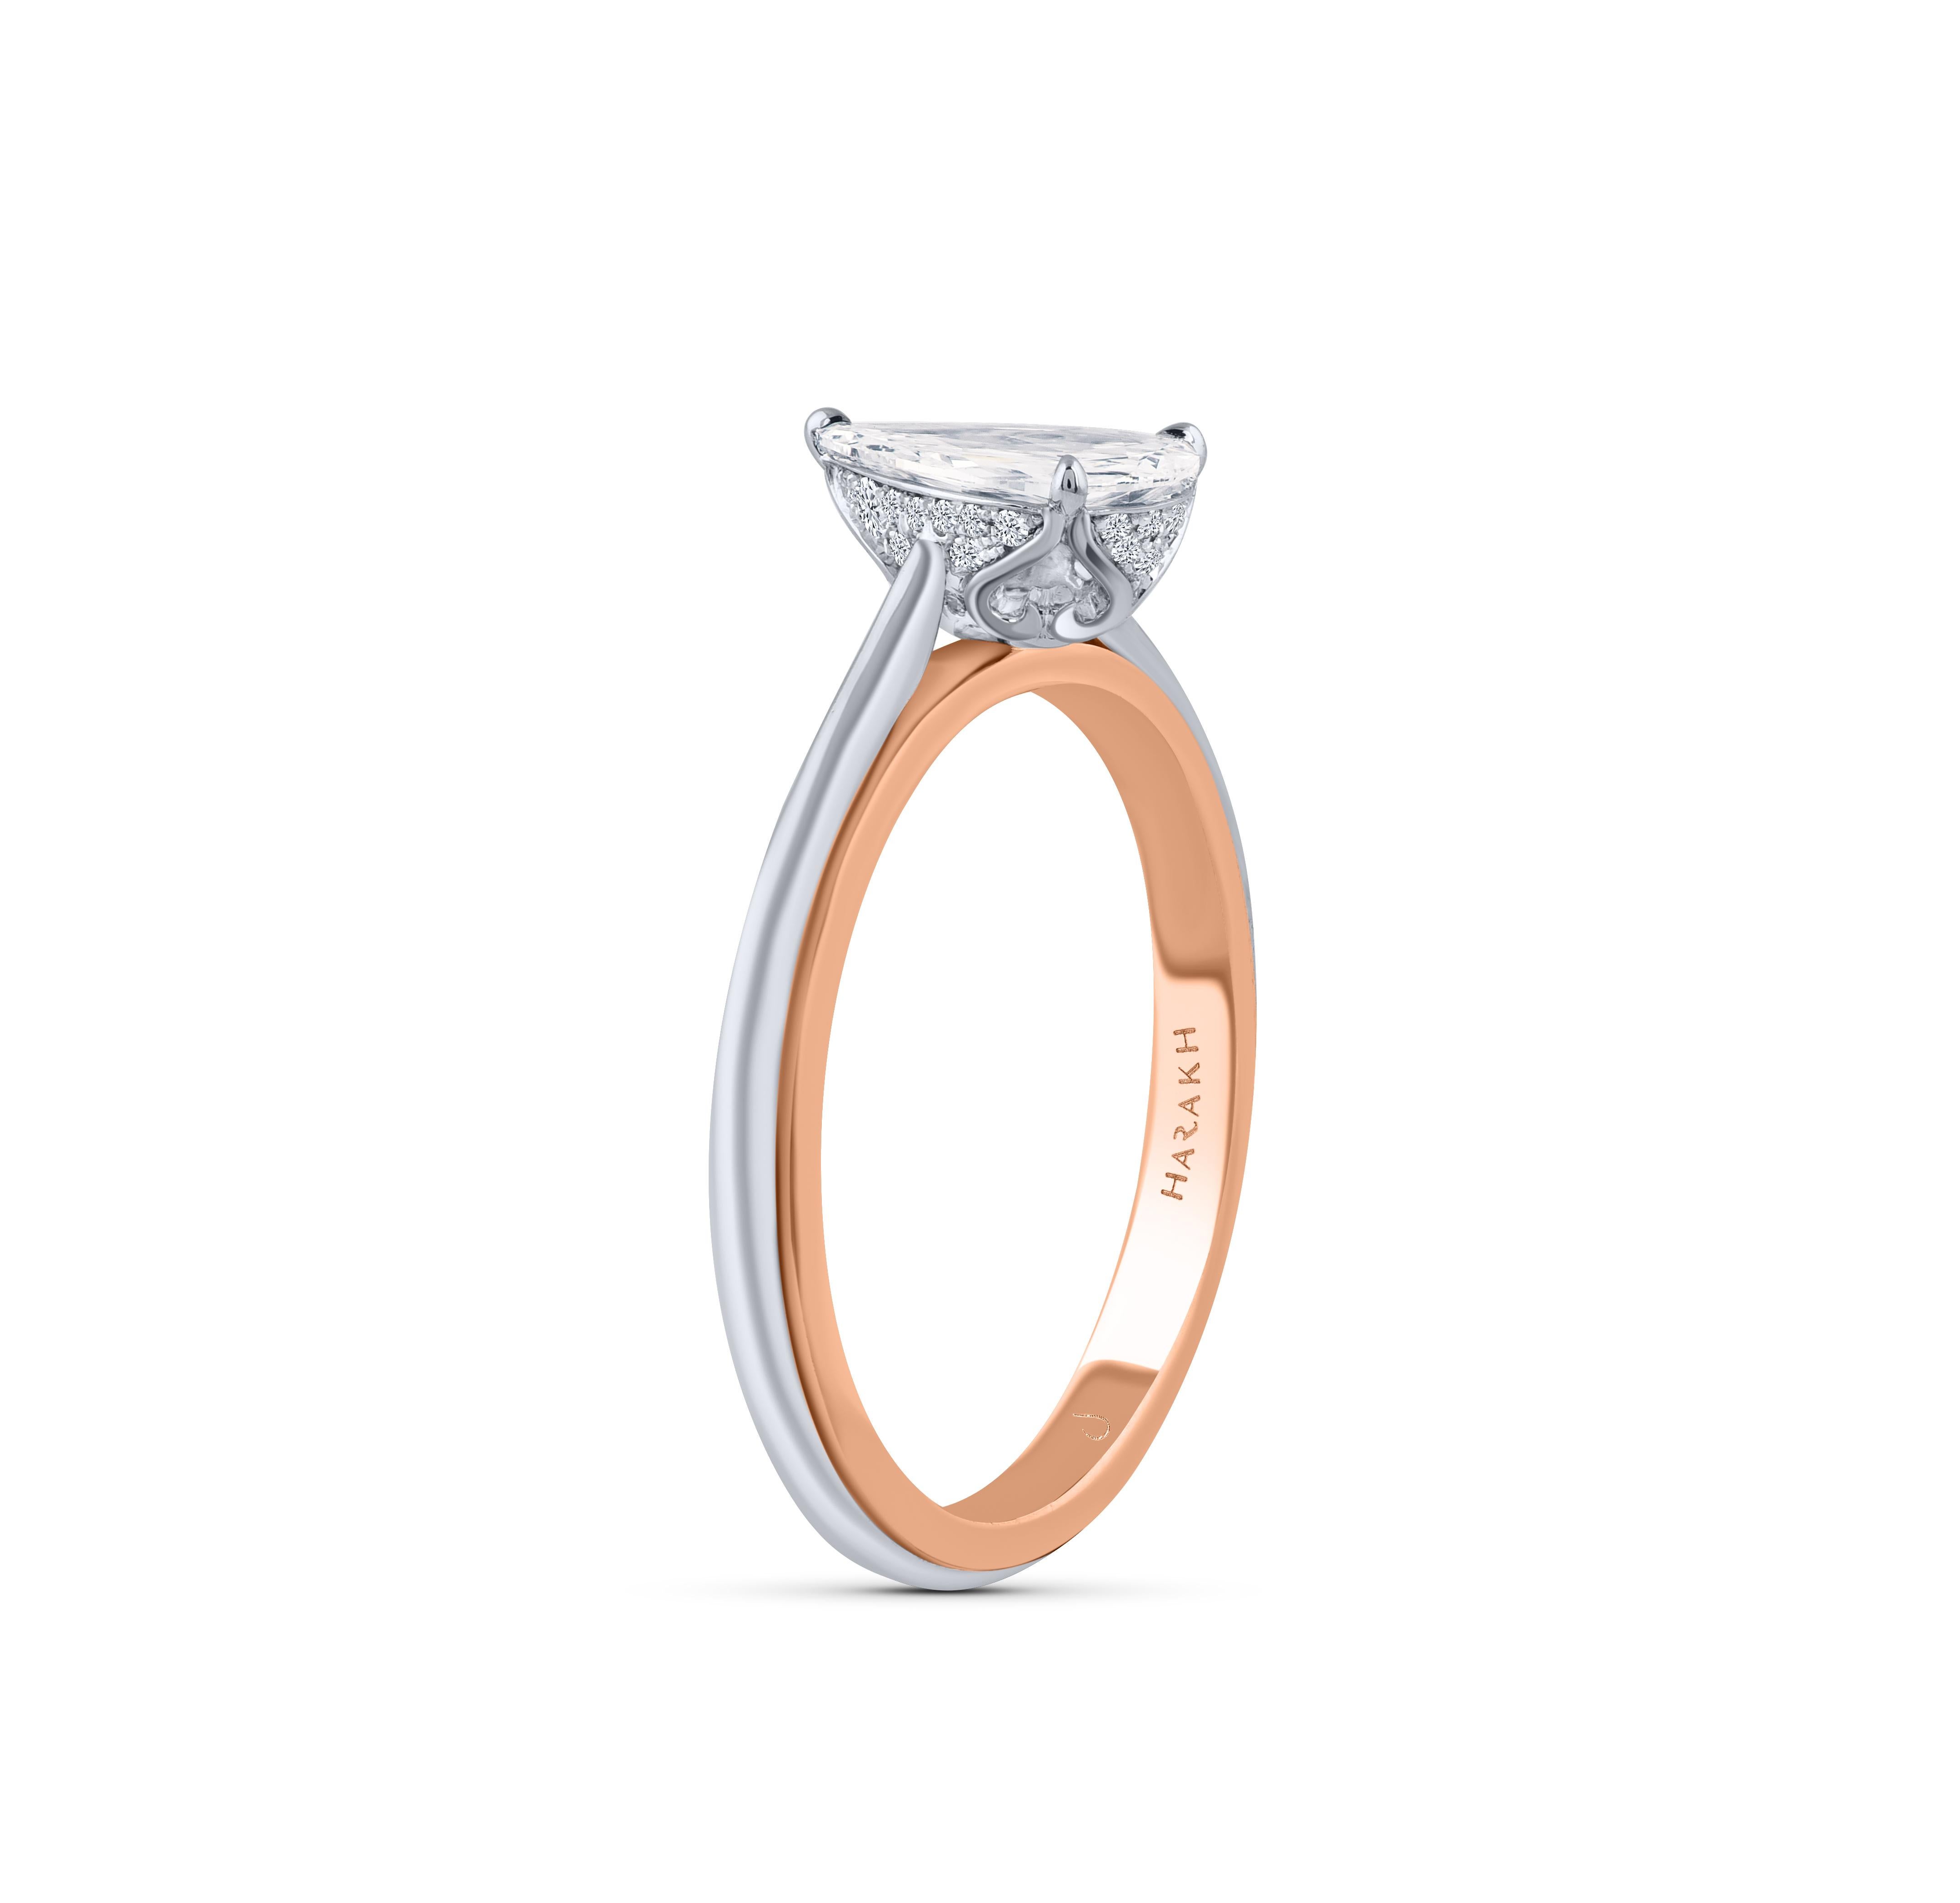 A classic style, this two-tone gold diamond engagement ring is studded with a 0.61 pear shape diamond. All our diamonds are D-F color, IF-VS clarity. This ring will come along with a HARAKH certificate of authentication and a Reflection Card.

This